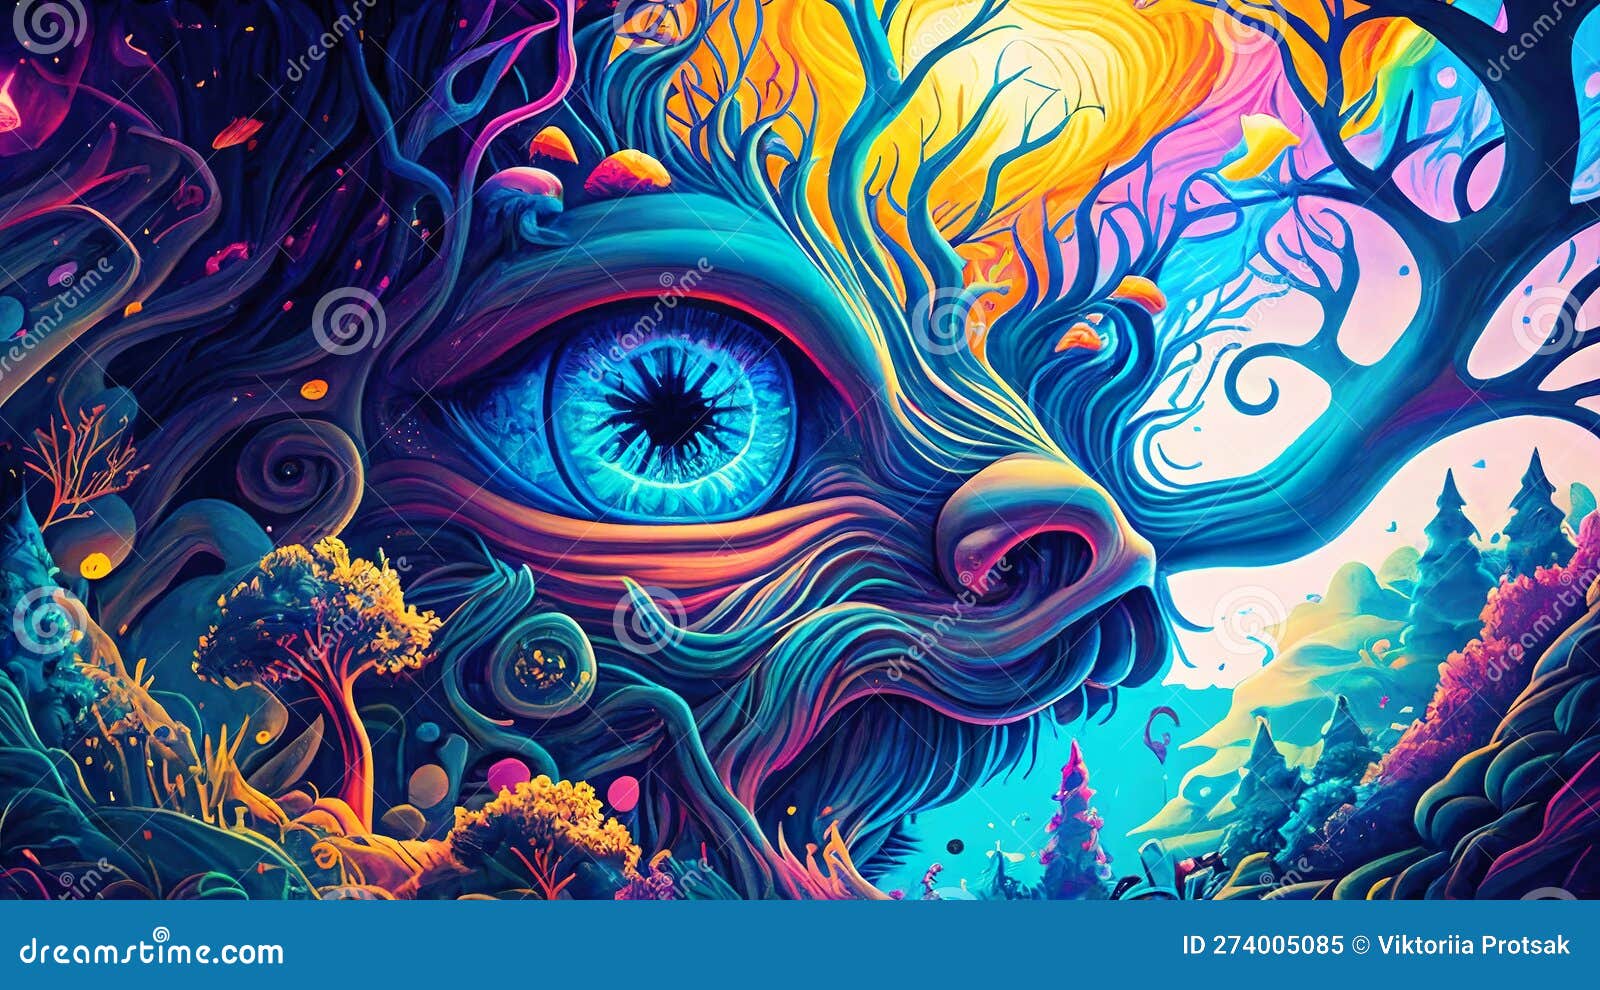 Psychedelic Wallpapers Full HD - Wallpaper Cave